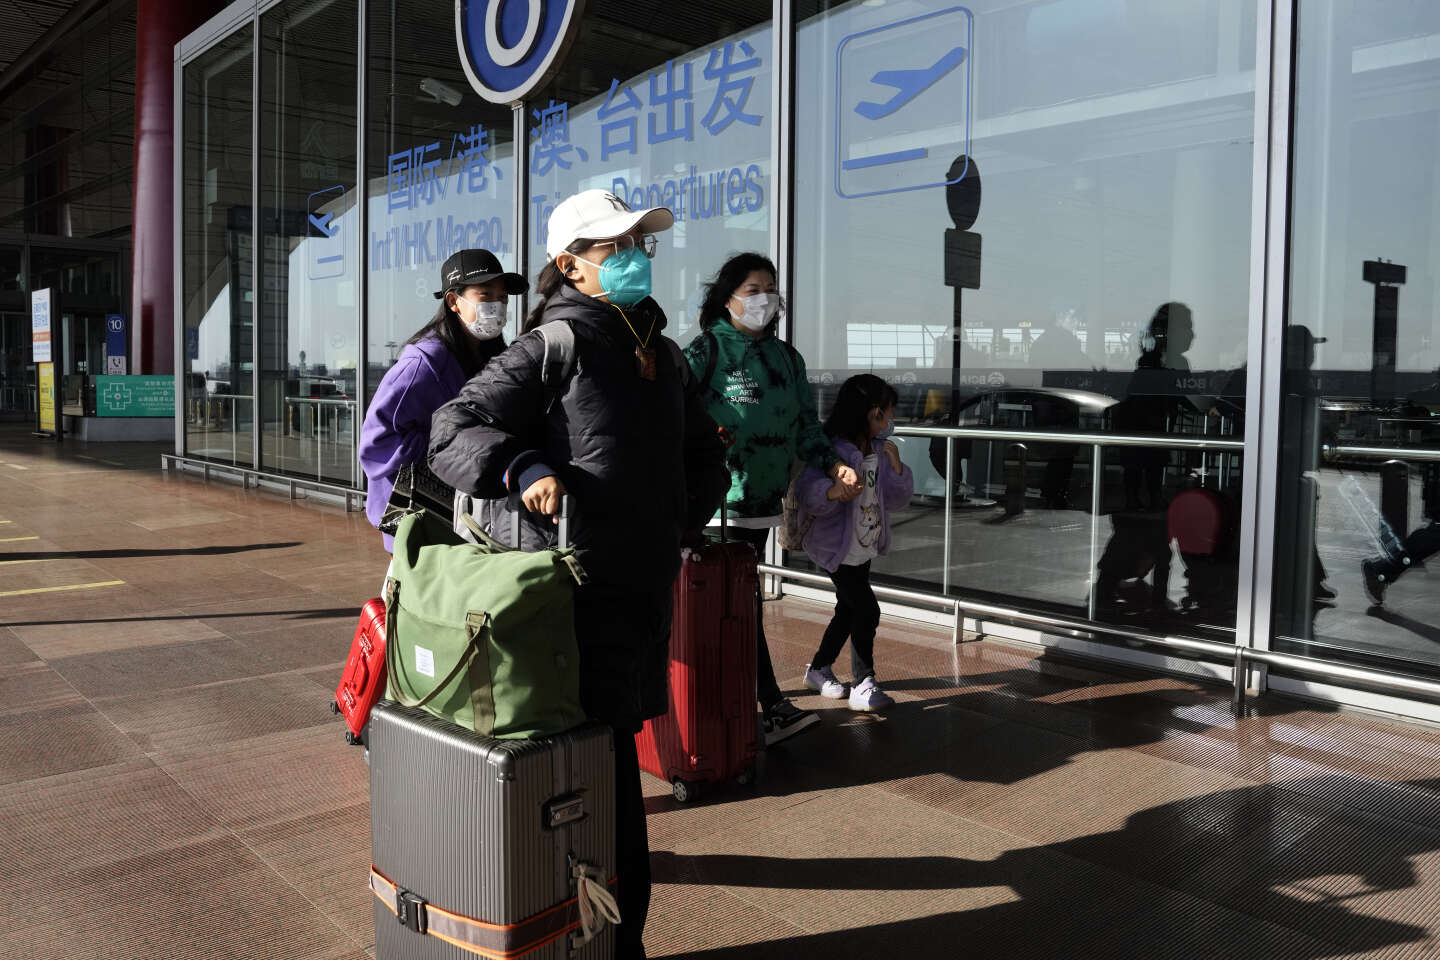 After Italy and Japan, several countries are considering imposing entry restrictions on travelers from China